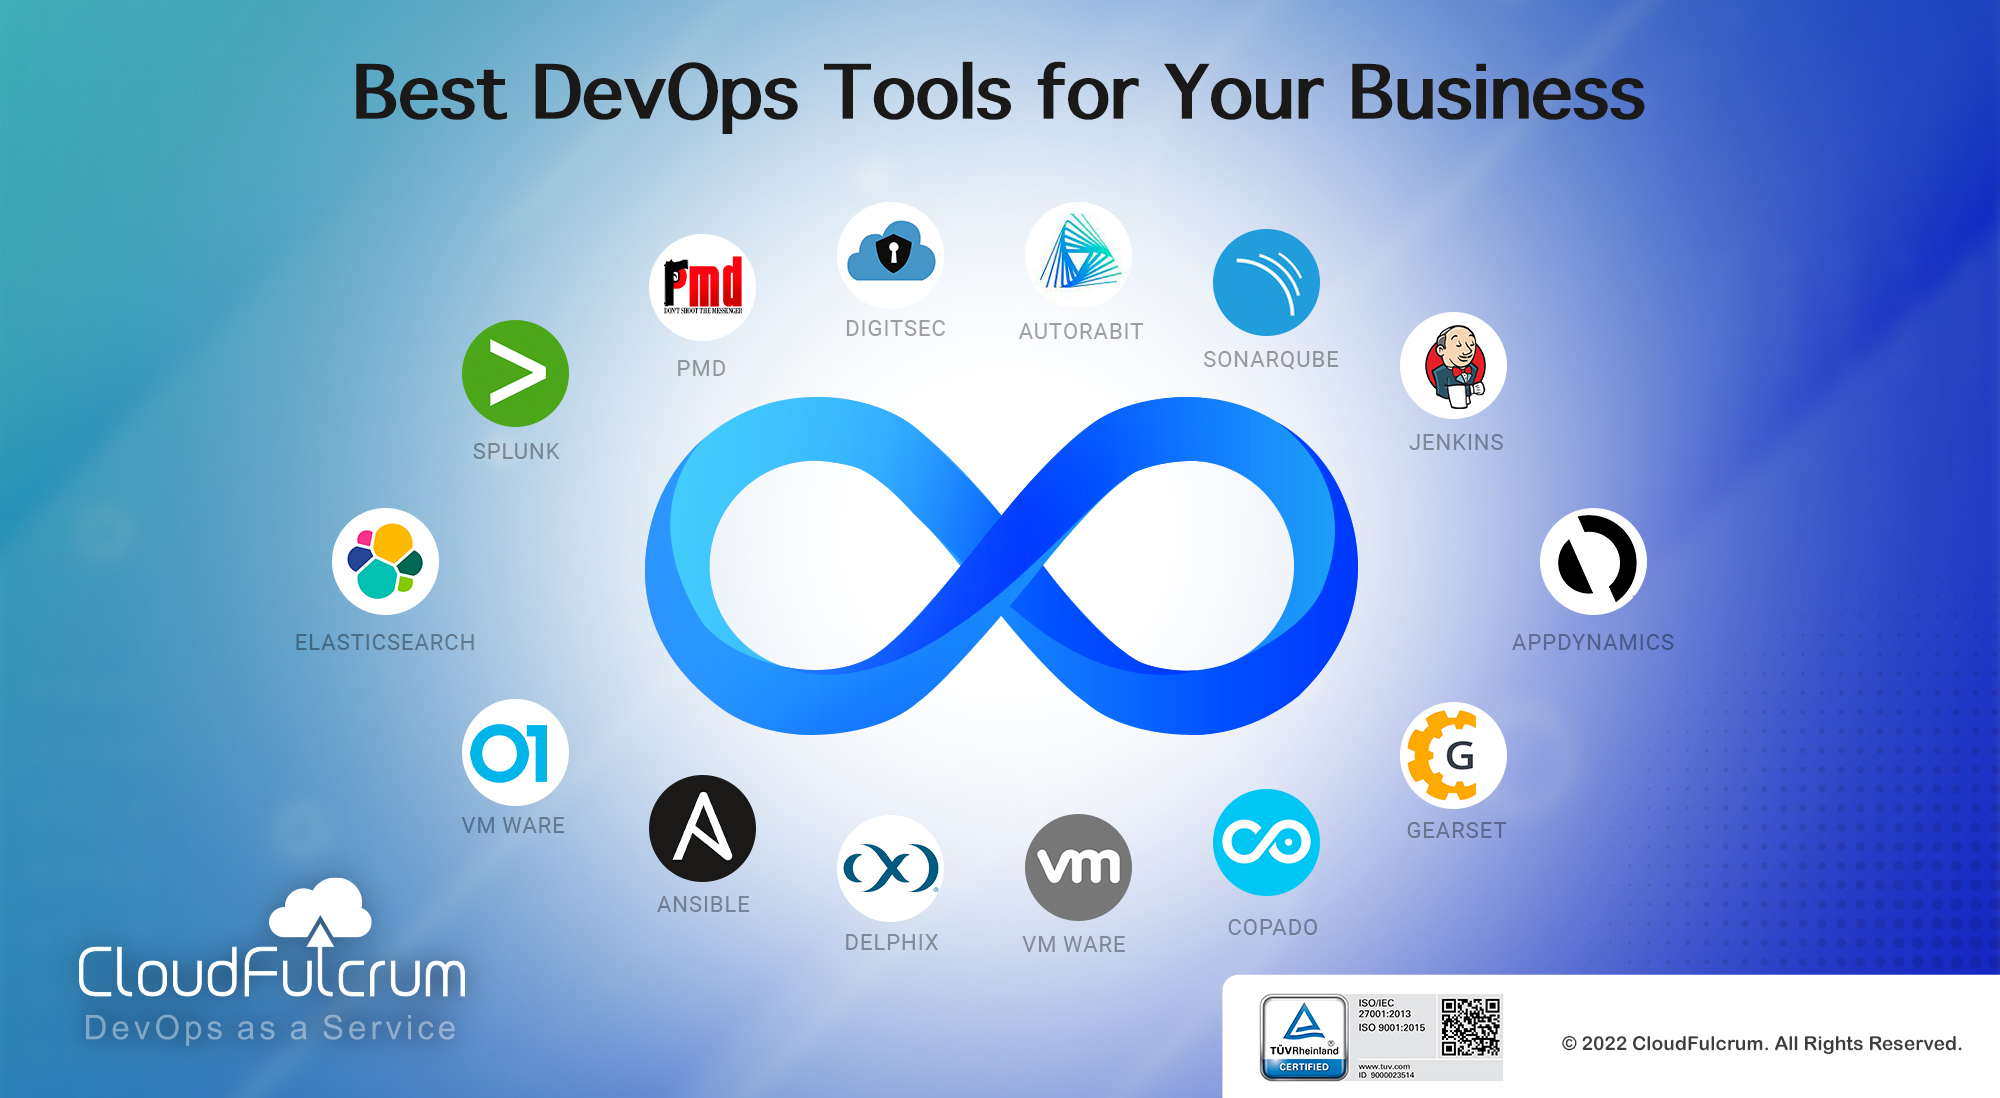 Your Guide to Choosing the Best DevOps Tools for Your Business